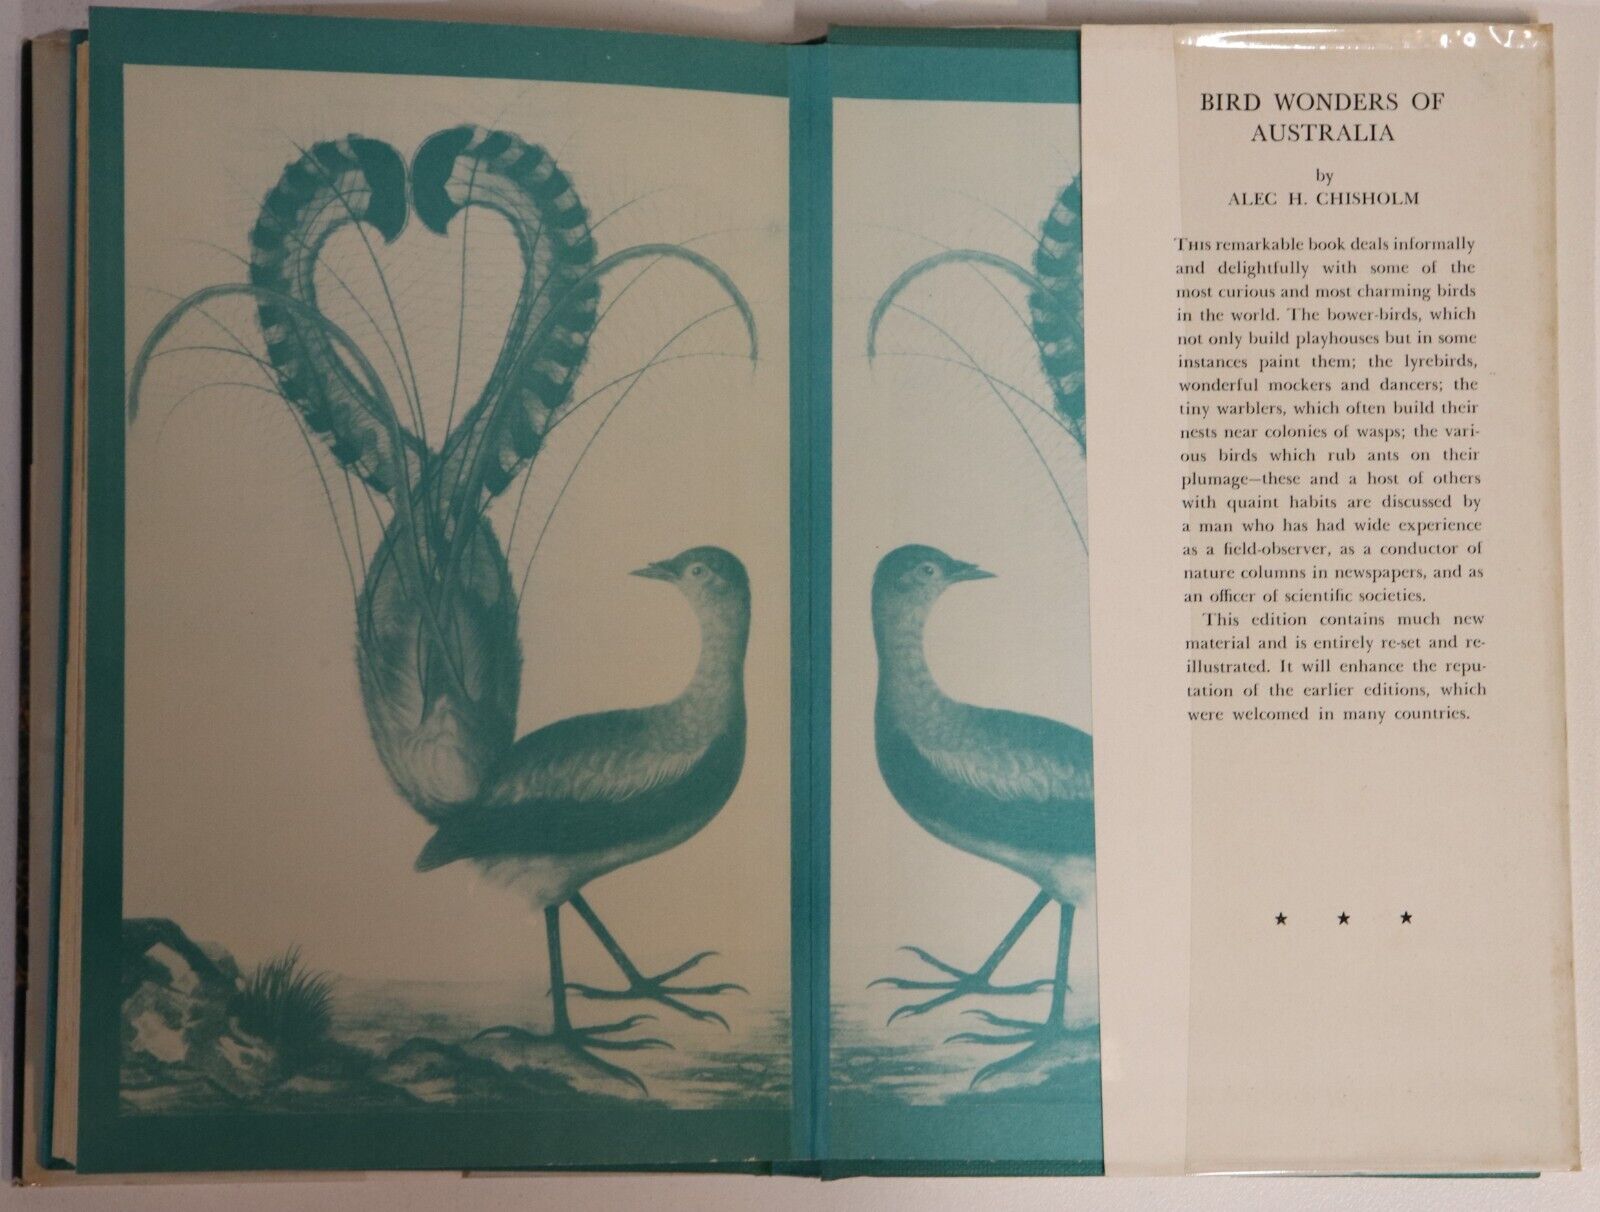 The Romance Of The Lyrebird: AC Chisholm - 1960 - 1st Ed. Natural History Book